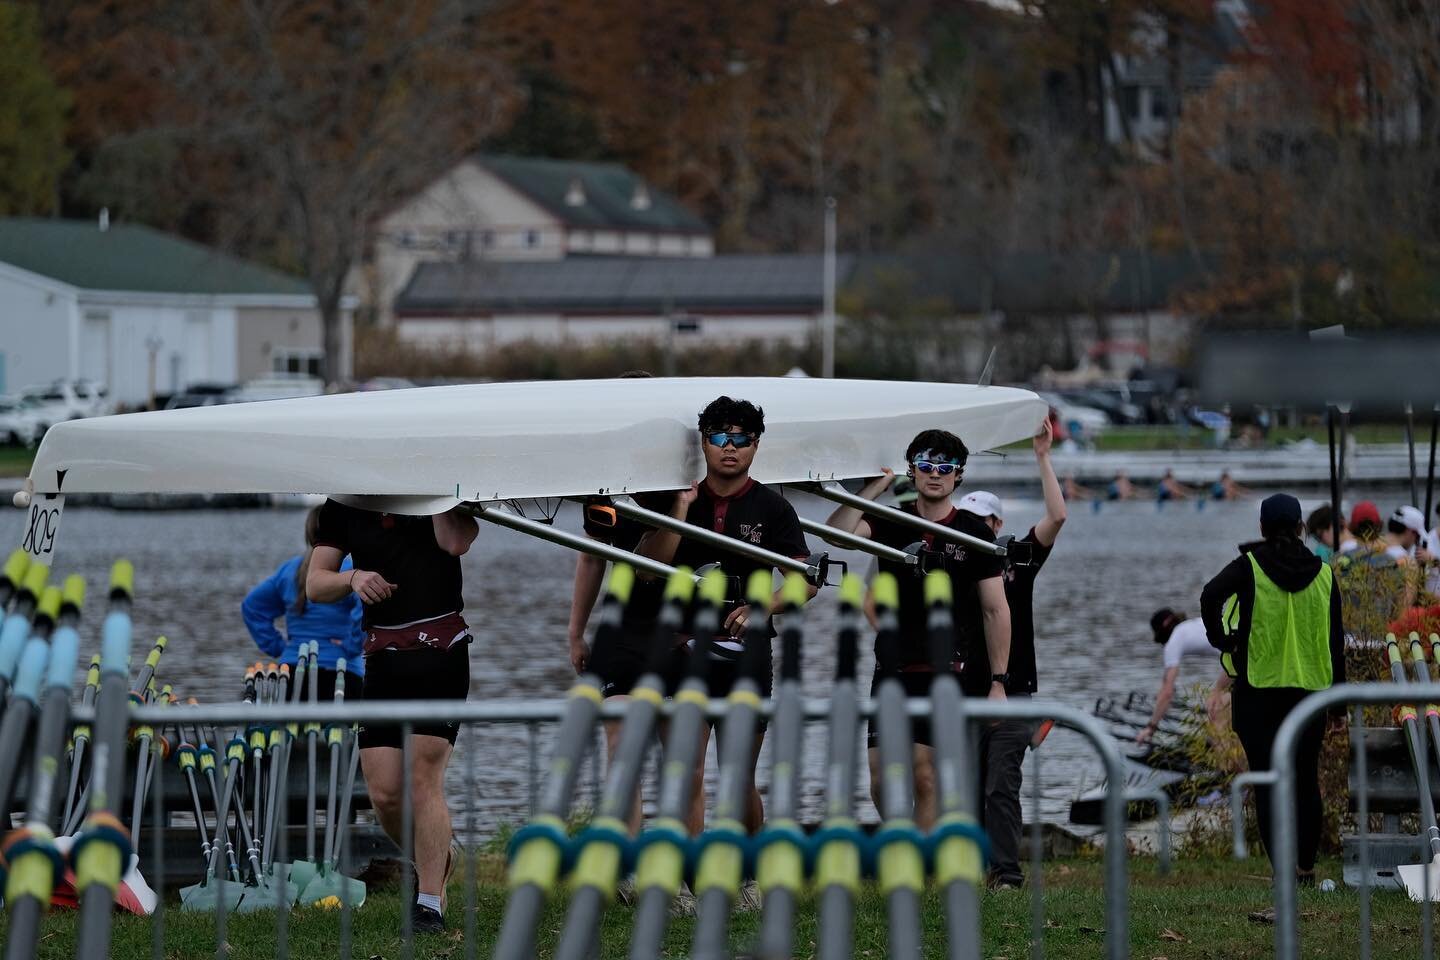 On Saturday, the Aggies finished out their 2023 fall racing season in Saratoga Spring, NY. With 9 boat entries and several athletes racing 3 times, the boys kept the momentum going from last weekend. 

Go Aggies!

📸: @shi_man_91